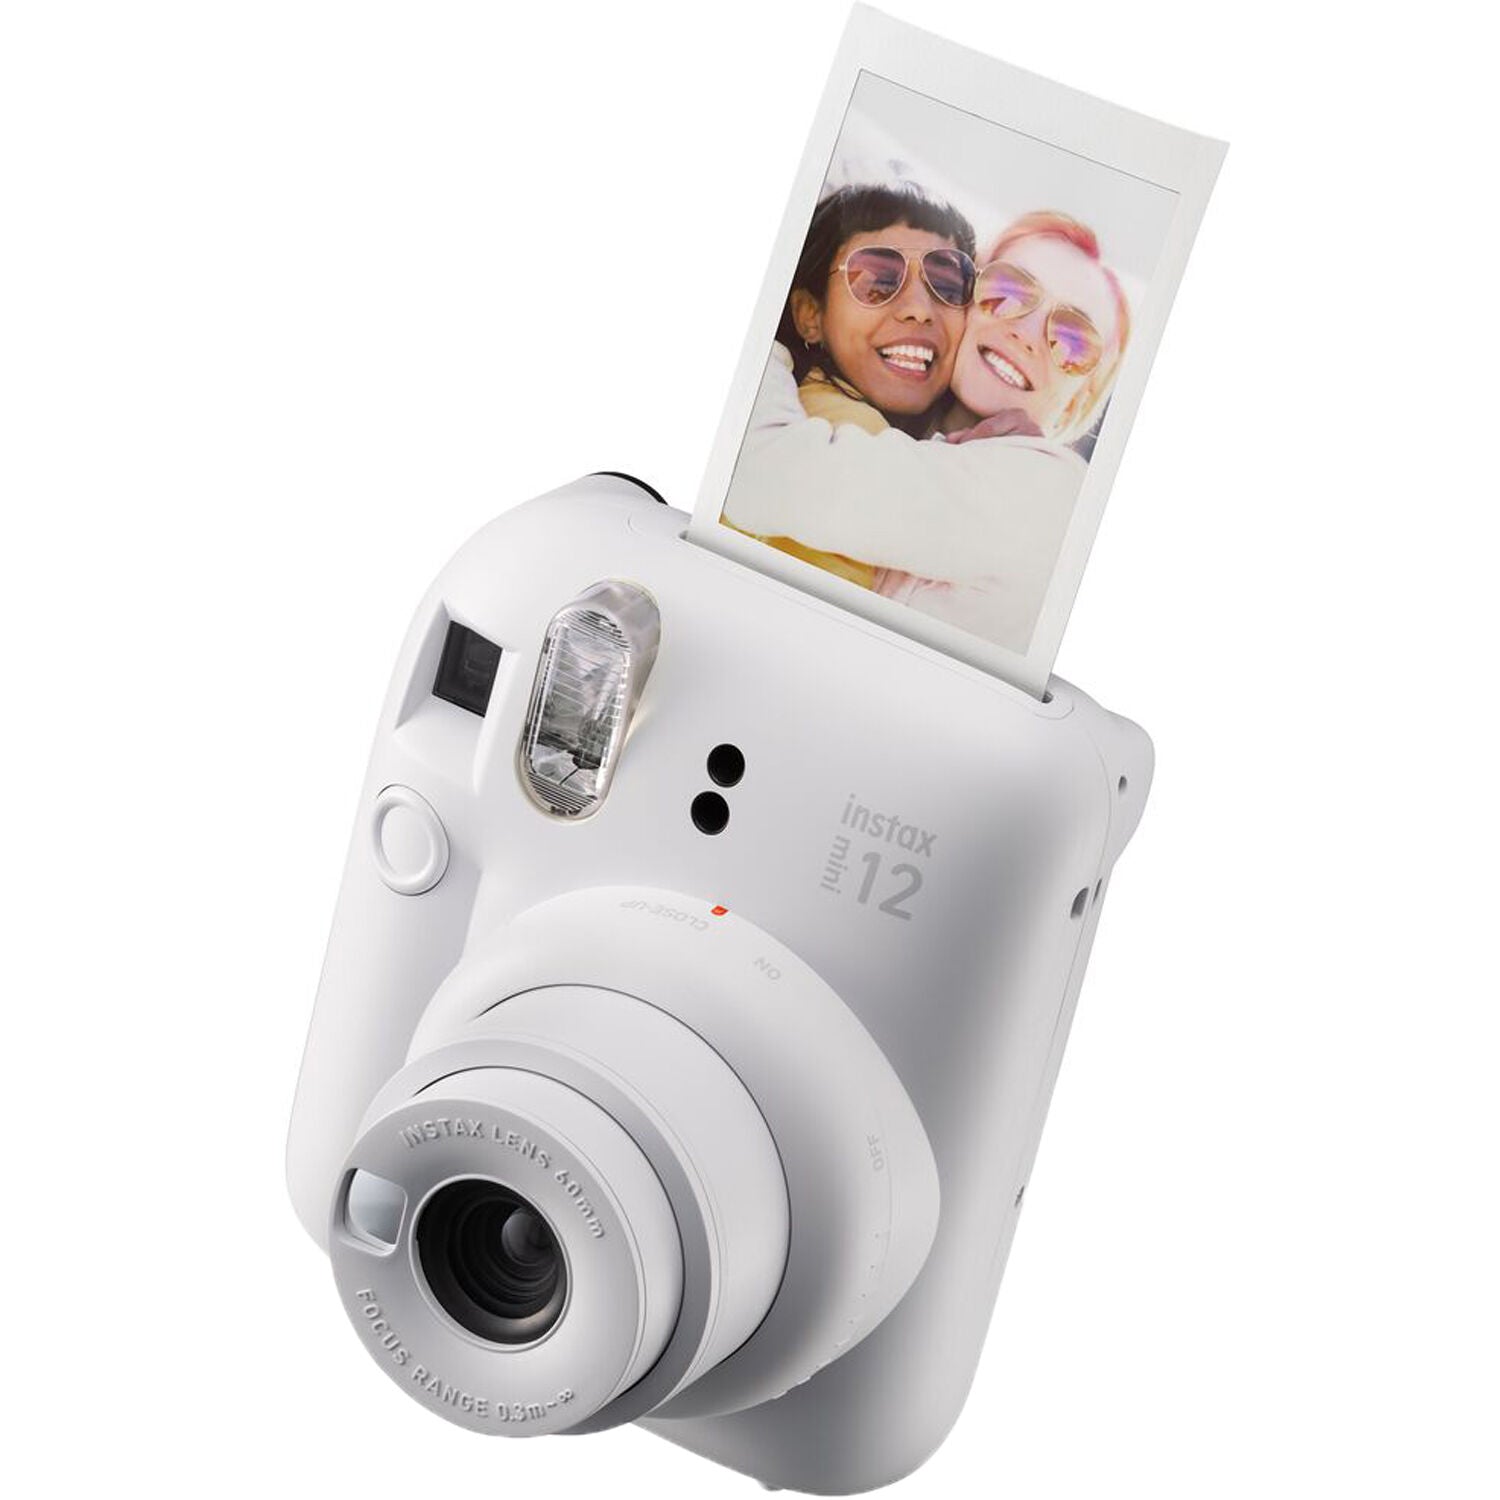 FUJIFILM INSTAX Mini 12 Instant Film Camera with green shell bag and 20 Shots Instant film (Clay White)